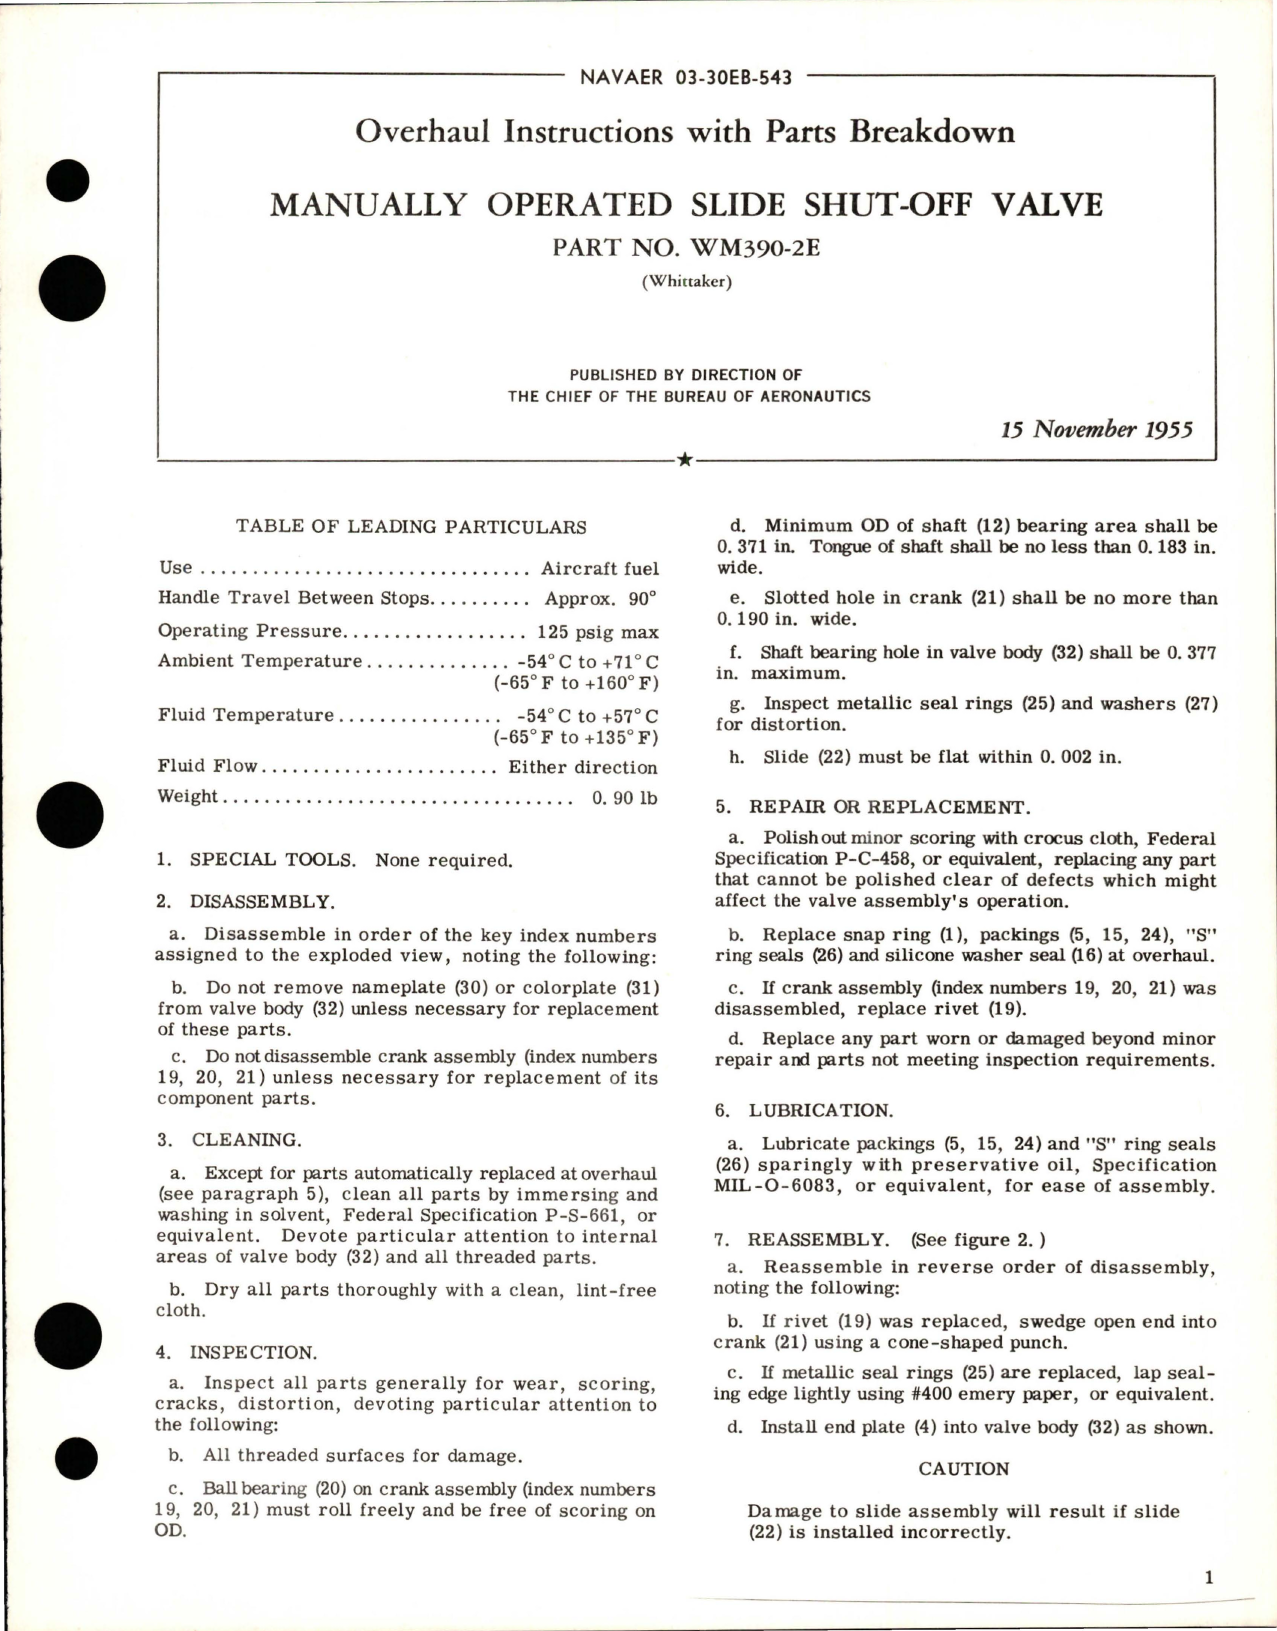 Sample page 1 from AirCorps Library document: Overhaul Instructions with Parts for Manually Operated Slide Shut Off Valve - Part WM390-2E